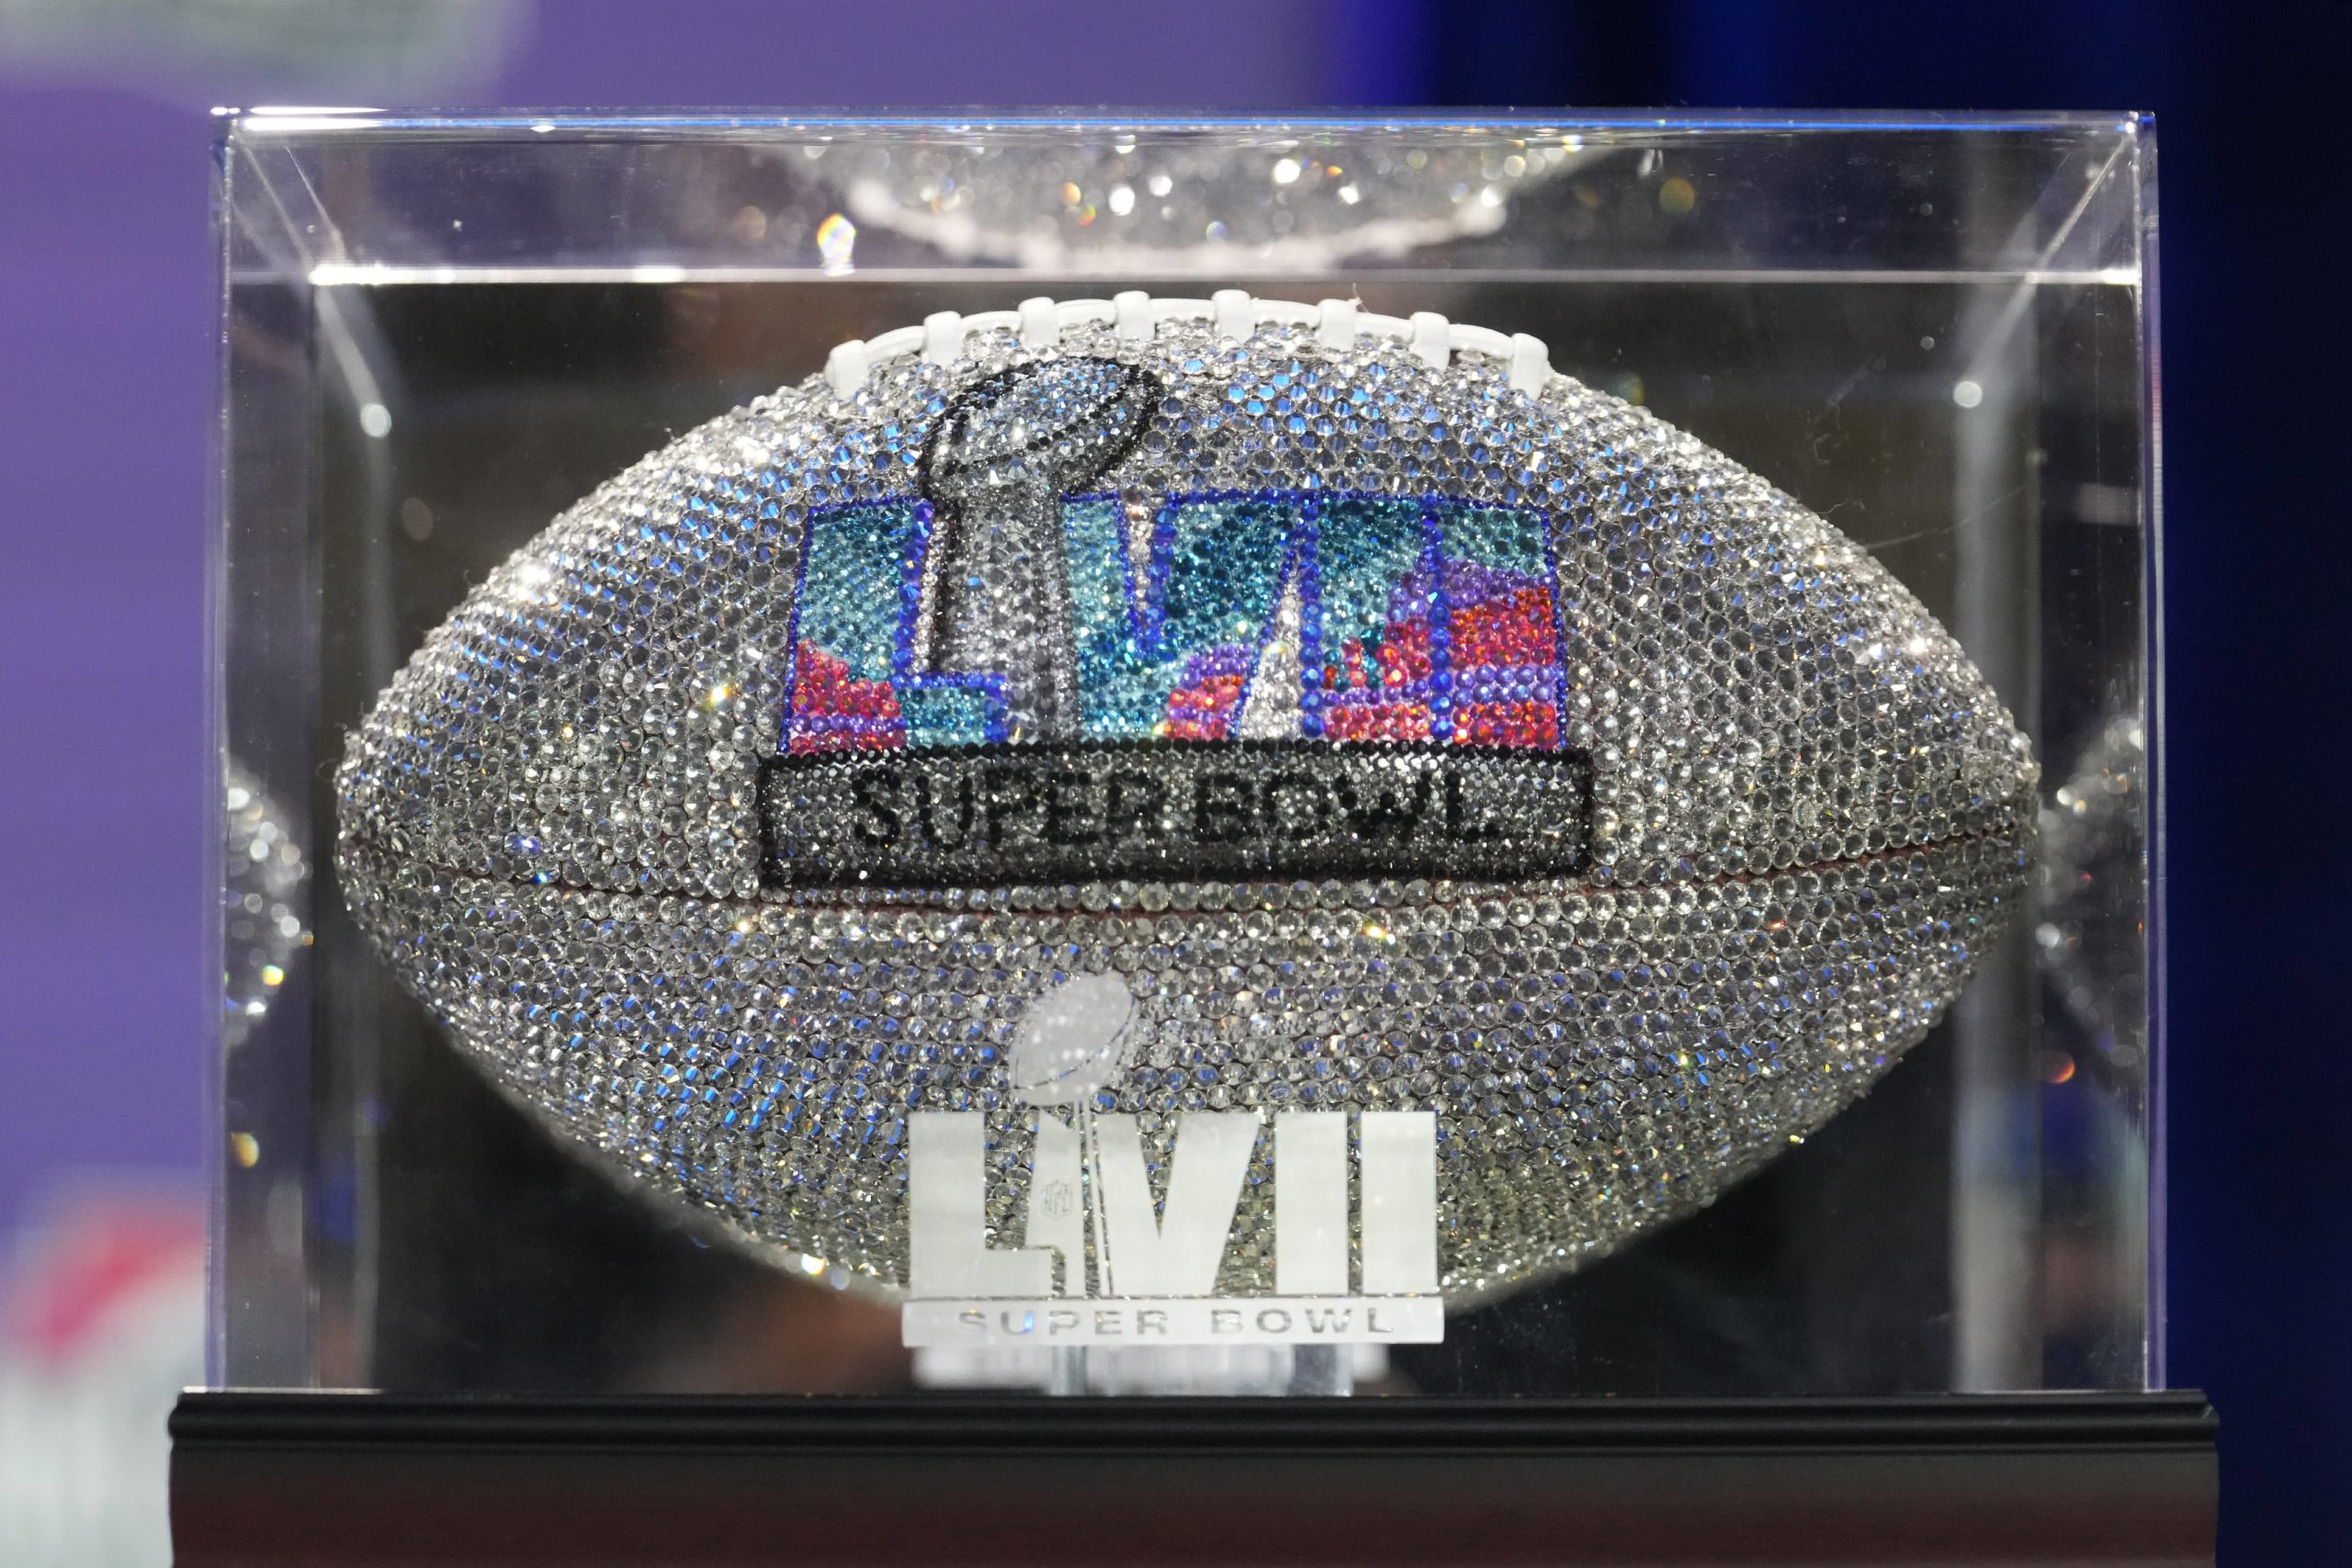 Super Bowl Records That Could Be Broken This Year